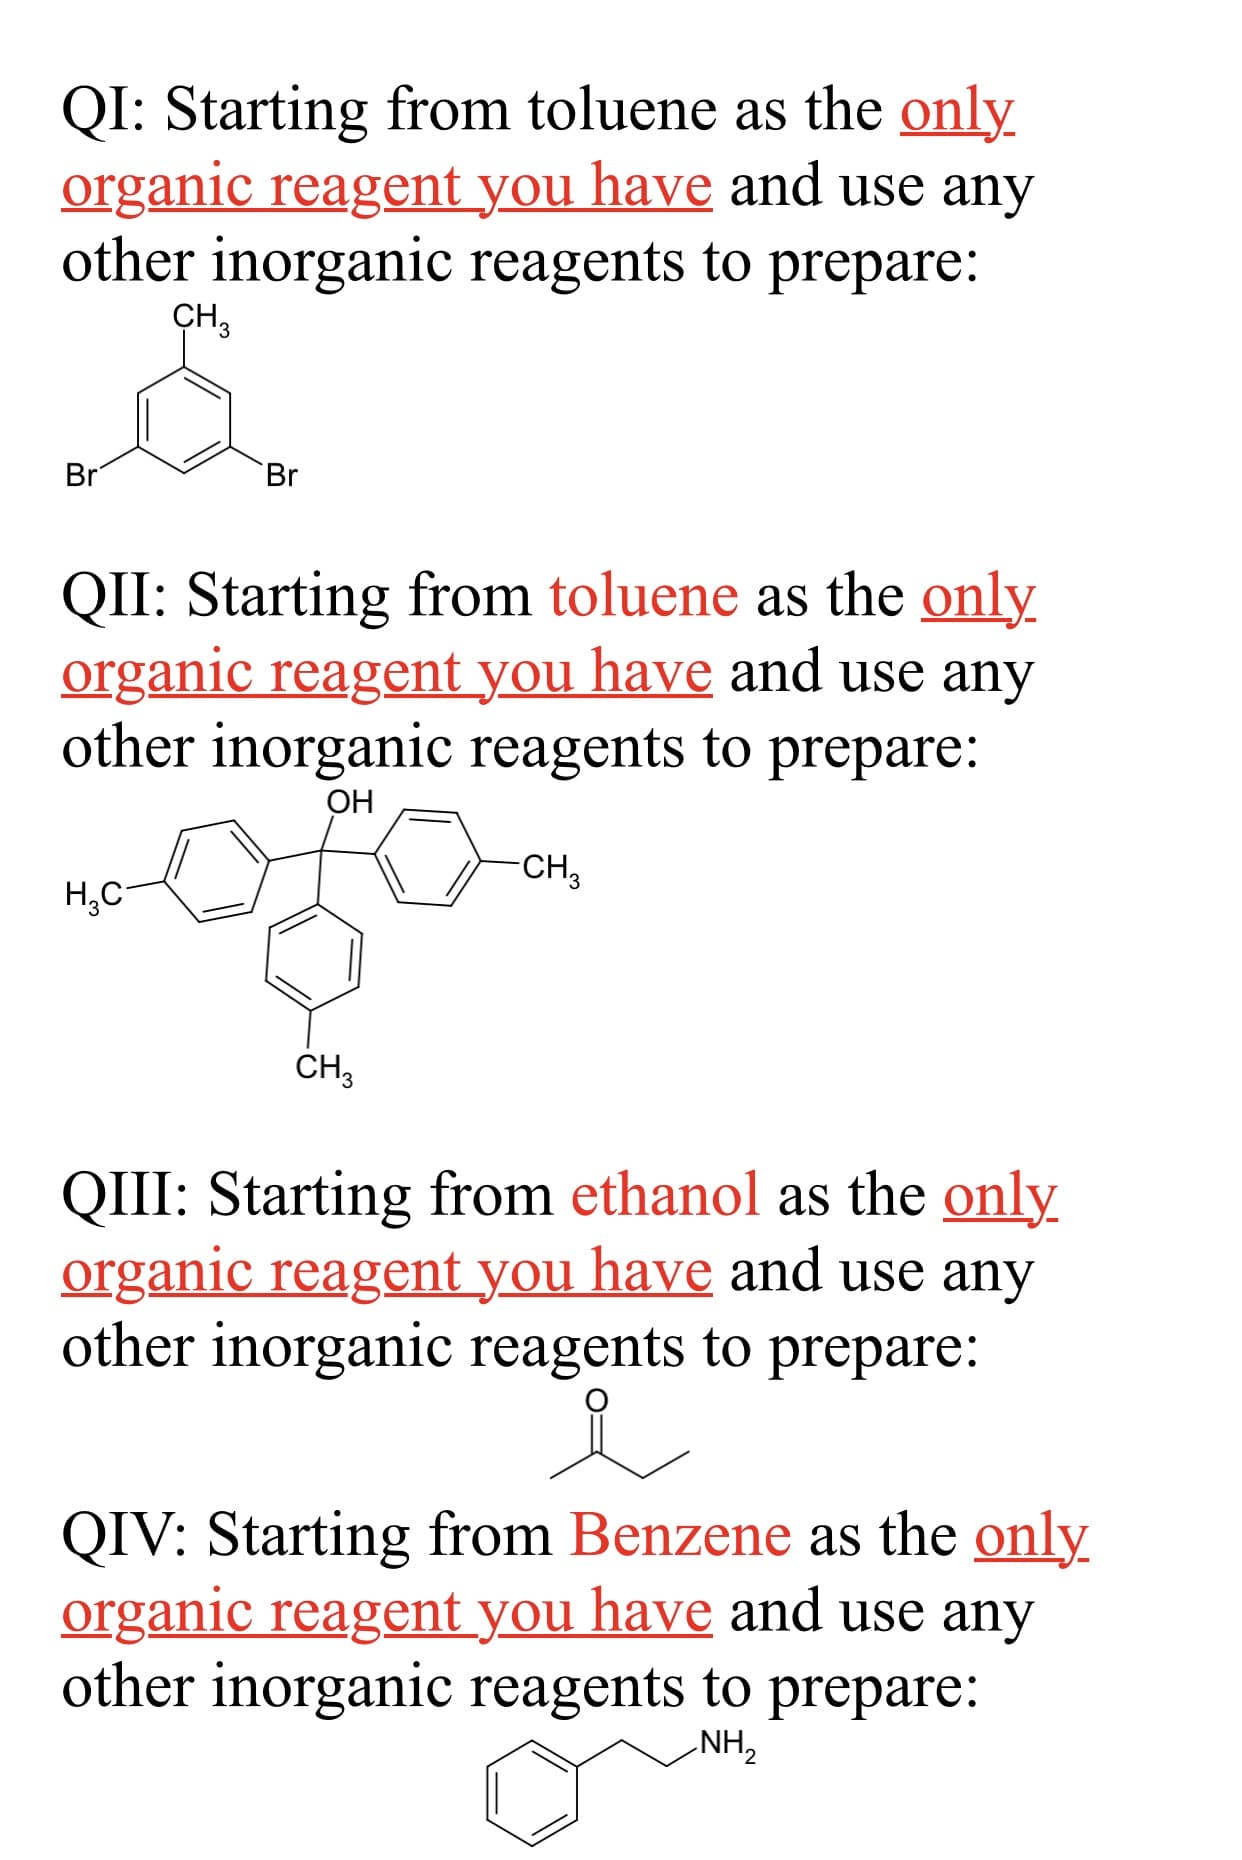 QI: Starting from toluene as the only
organic reagent you have and use any
other inorganic reagents to prepare:
ҫн,
Br
Br
QII: Starting from toluene as the only
organic reagent you have and use any
other inorganic reagents to prepare:
ОН
CH3
Н,С
CH3
QIII: Starting from ethanol as the only
organic reagent you have and use any
other inorganic reagents to prepare:
QIV: Starting from Benzene as the only
organic reagent you have and use any
other inorganic reagents to prepare:
NH,
